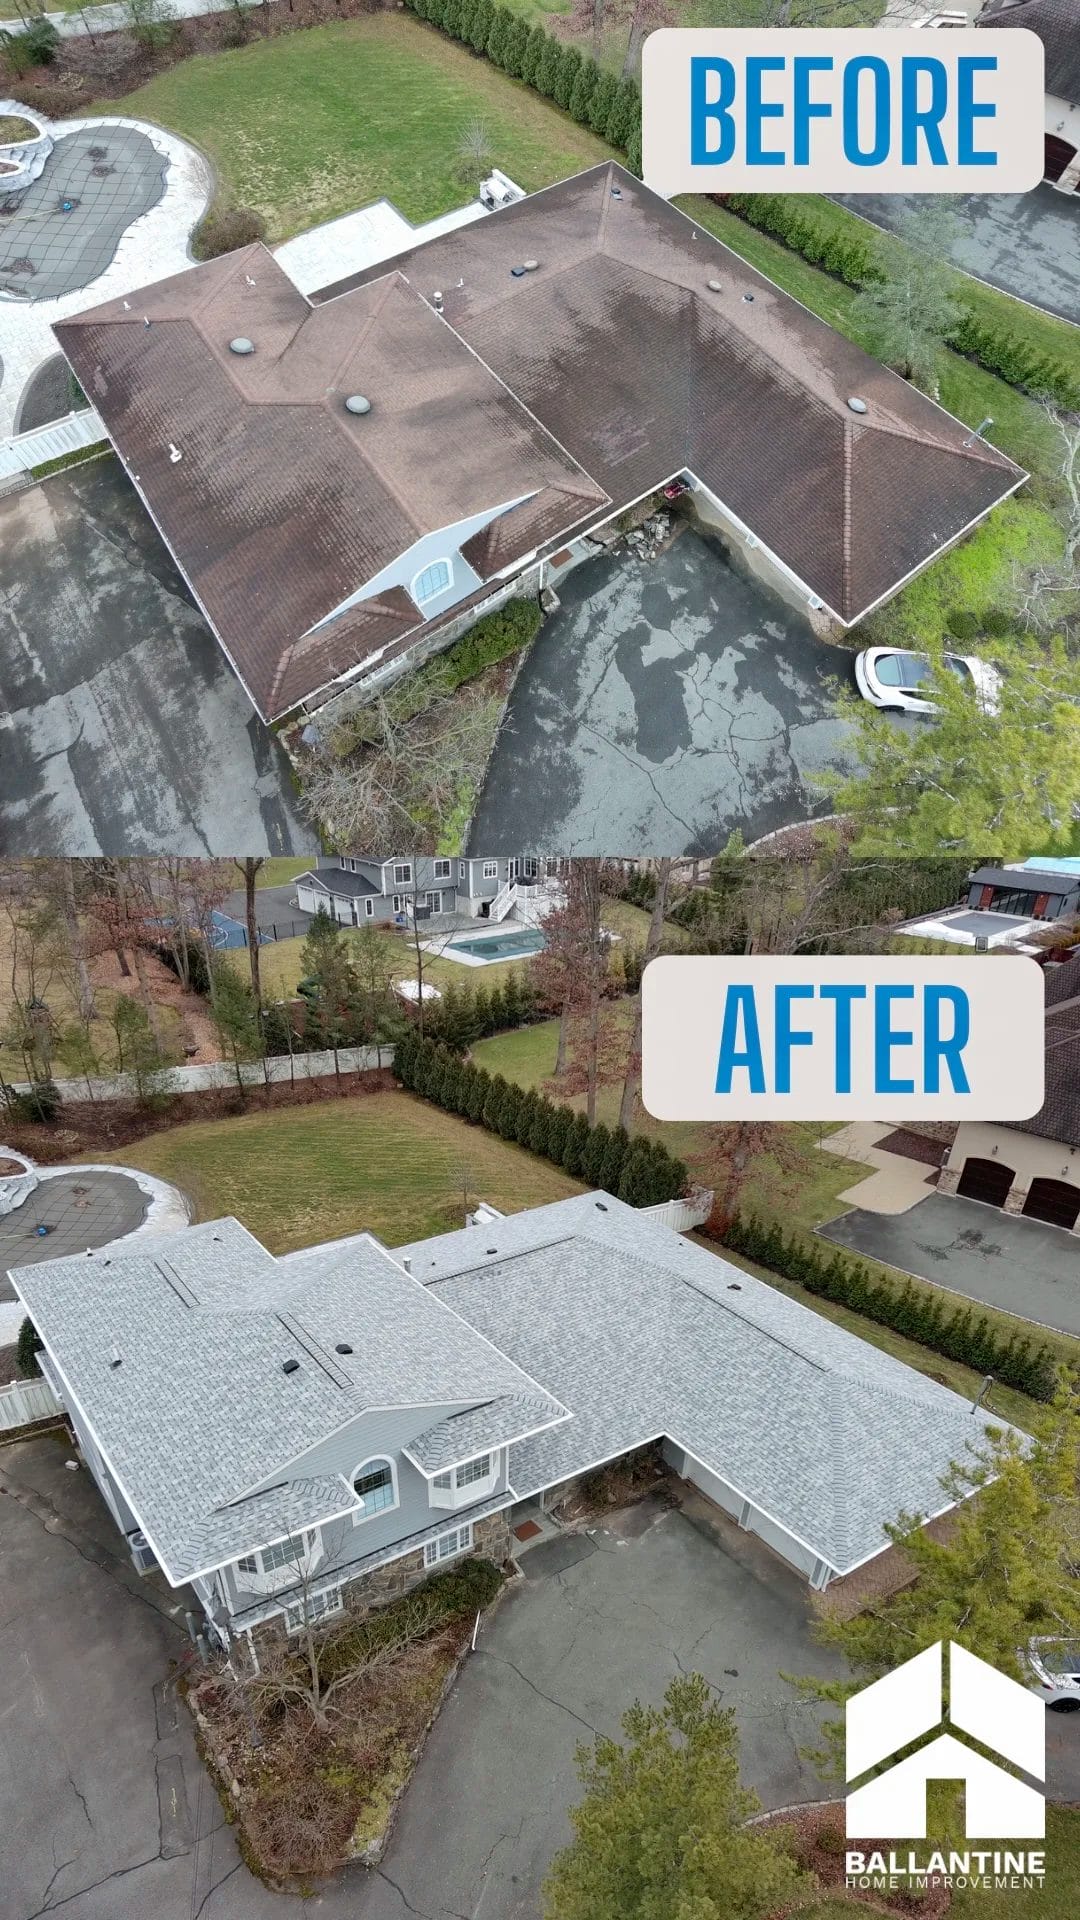 Before & After From Our Roofing Company: Owens Corning Sierra Gray Shingles on a Home in Livingston, NJ